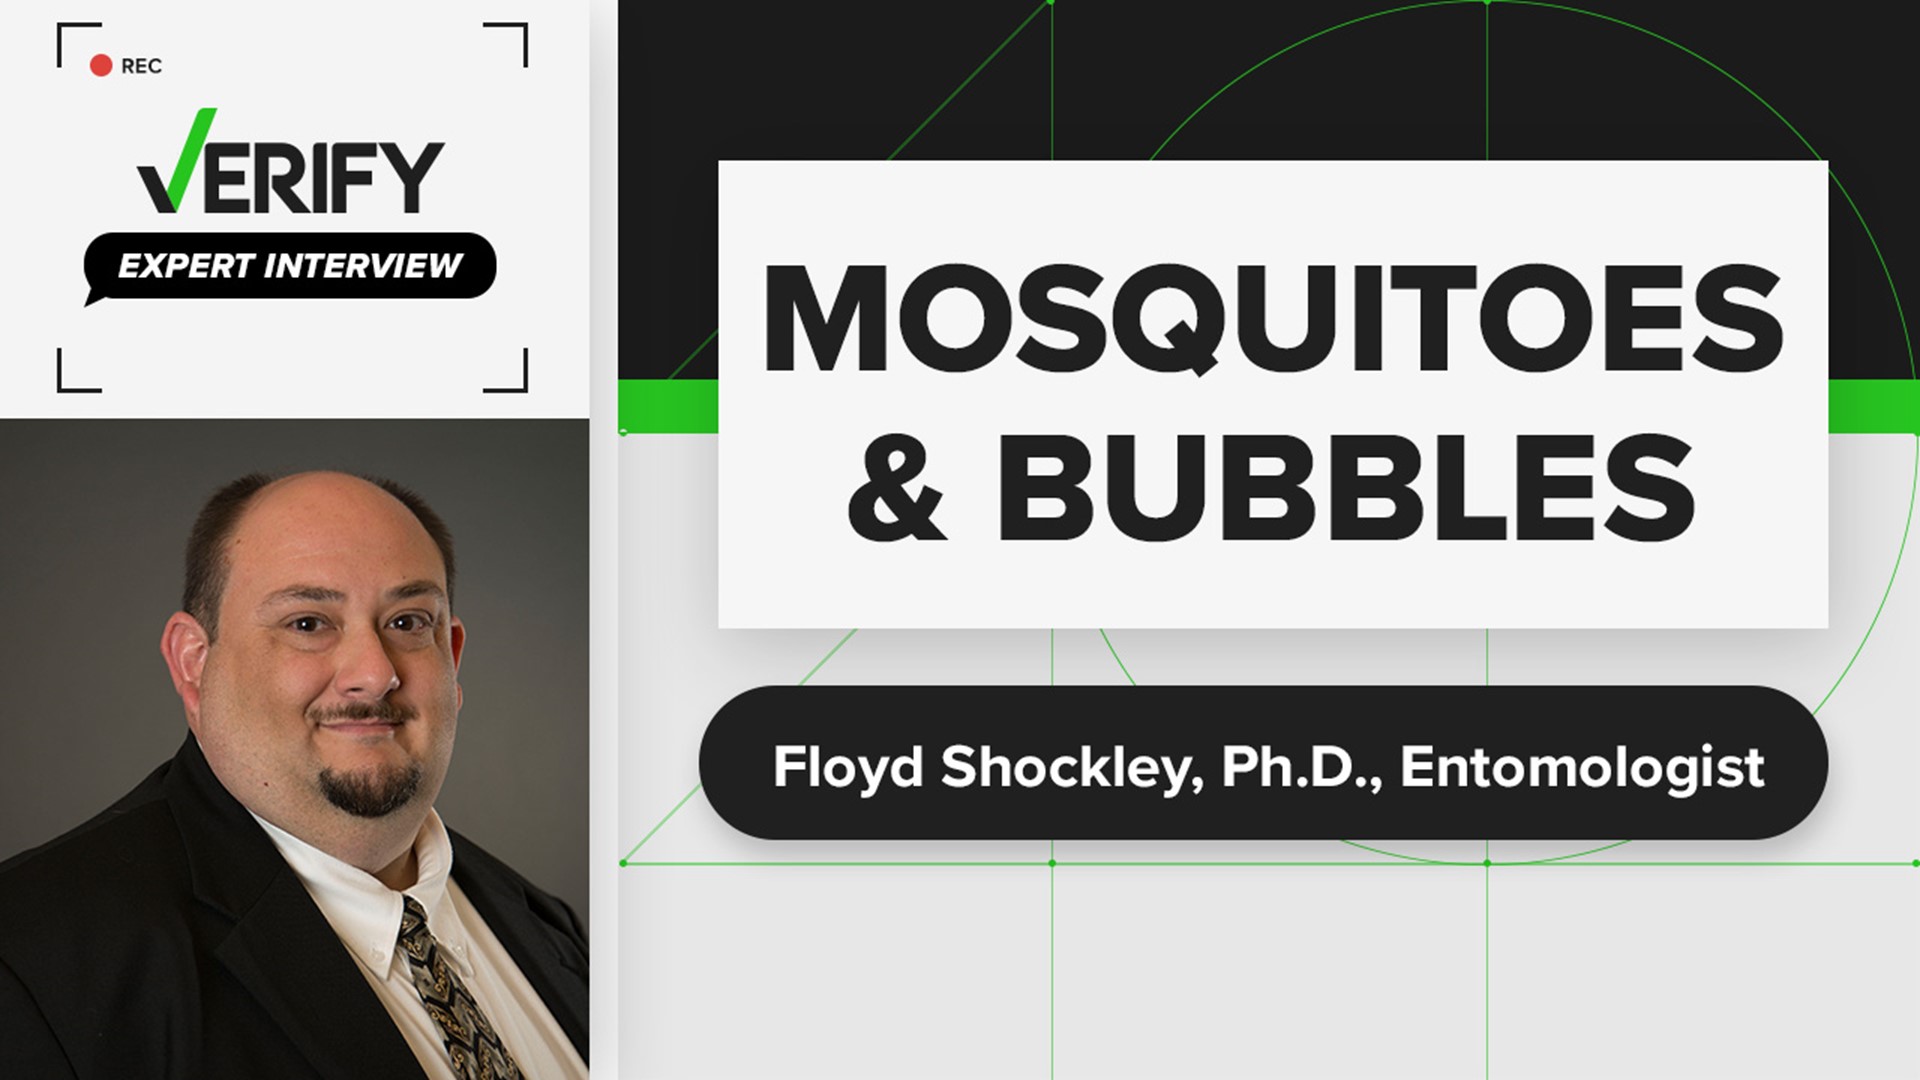 Entomologist Floyd Shockley, Ph.D. talks about the myth that bubbles keep mosquitoes away.